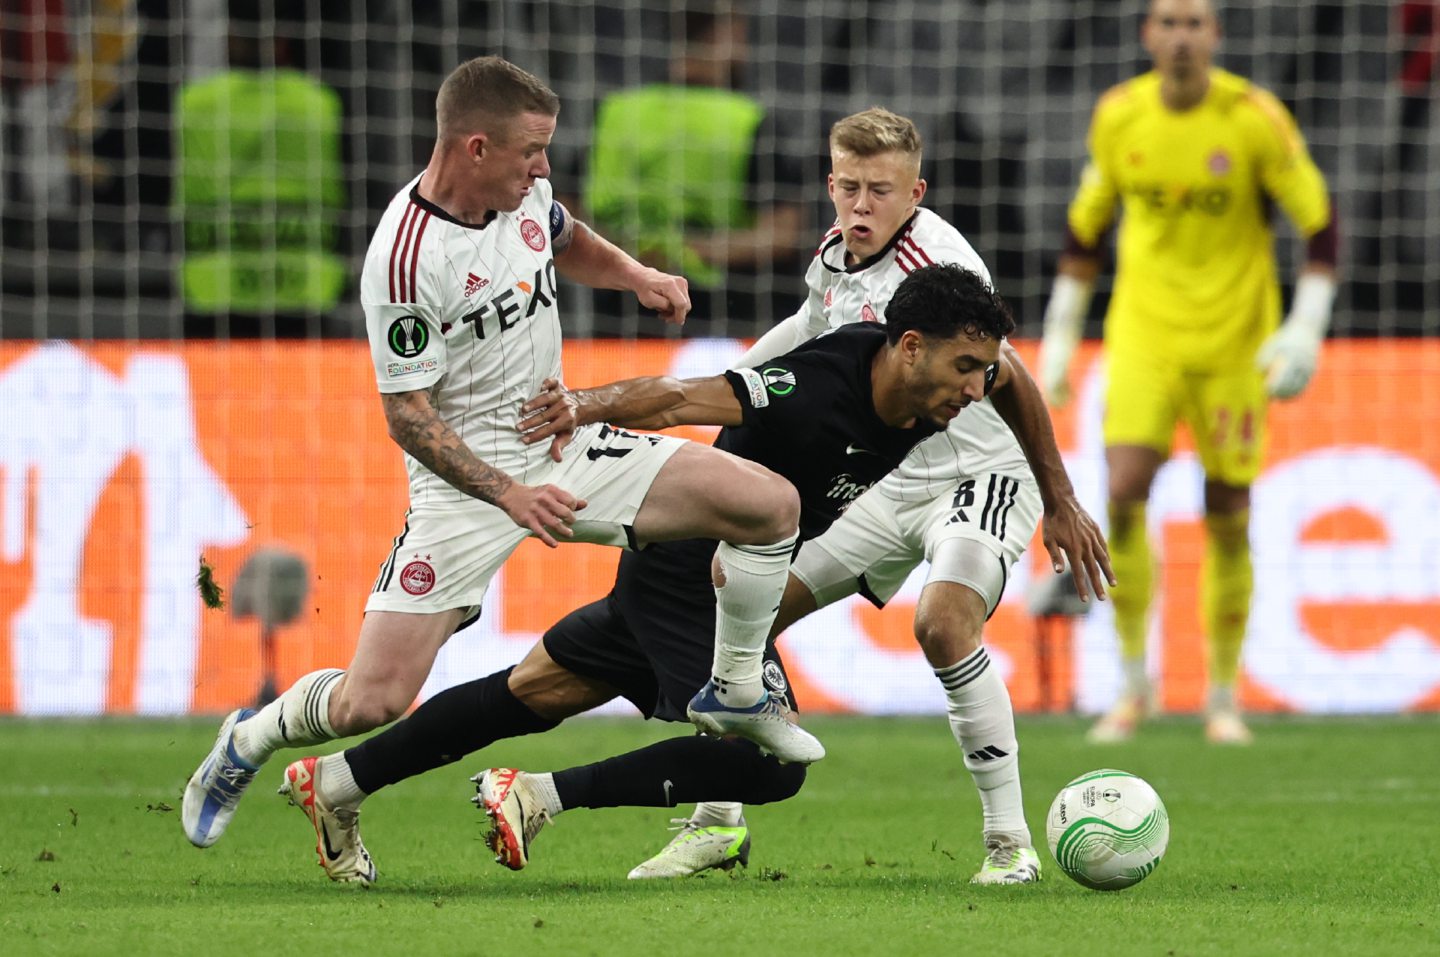 Aberdeen's Jonny Hayes and Connor Barron against Frankfurt's Fares Chaibi during the Europa Conference League Group Stage match.